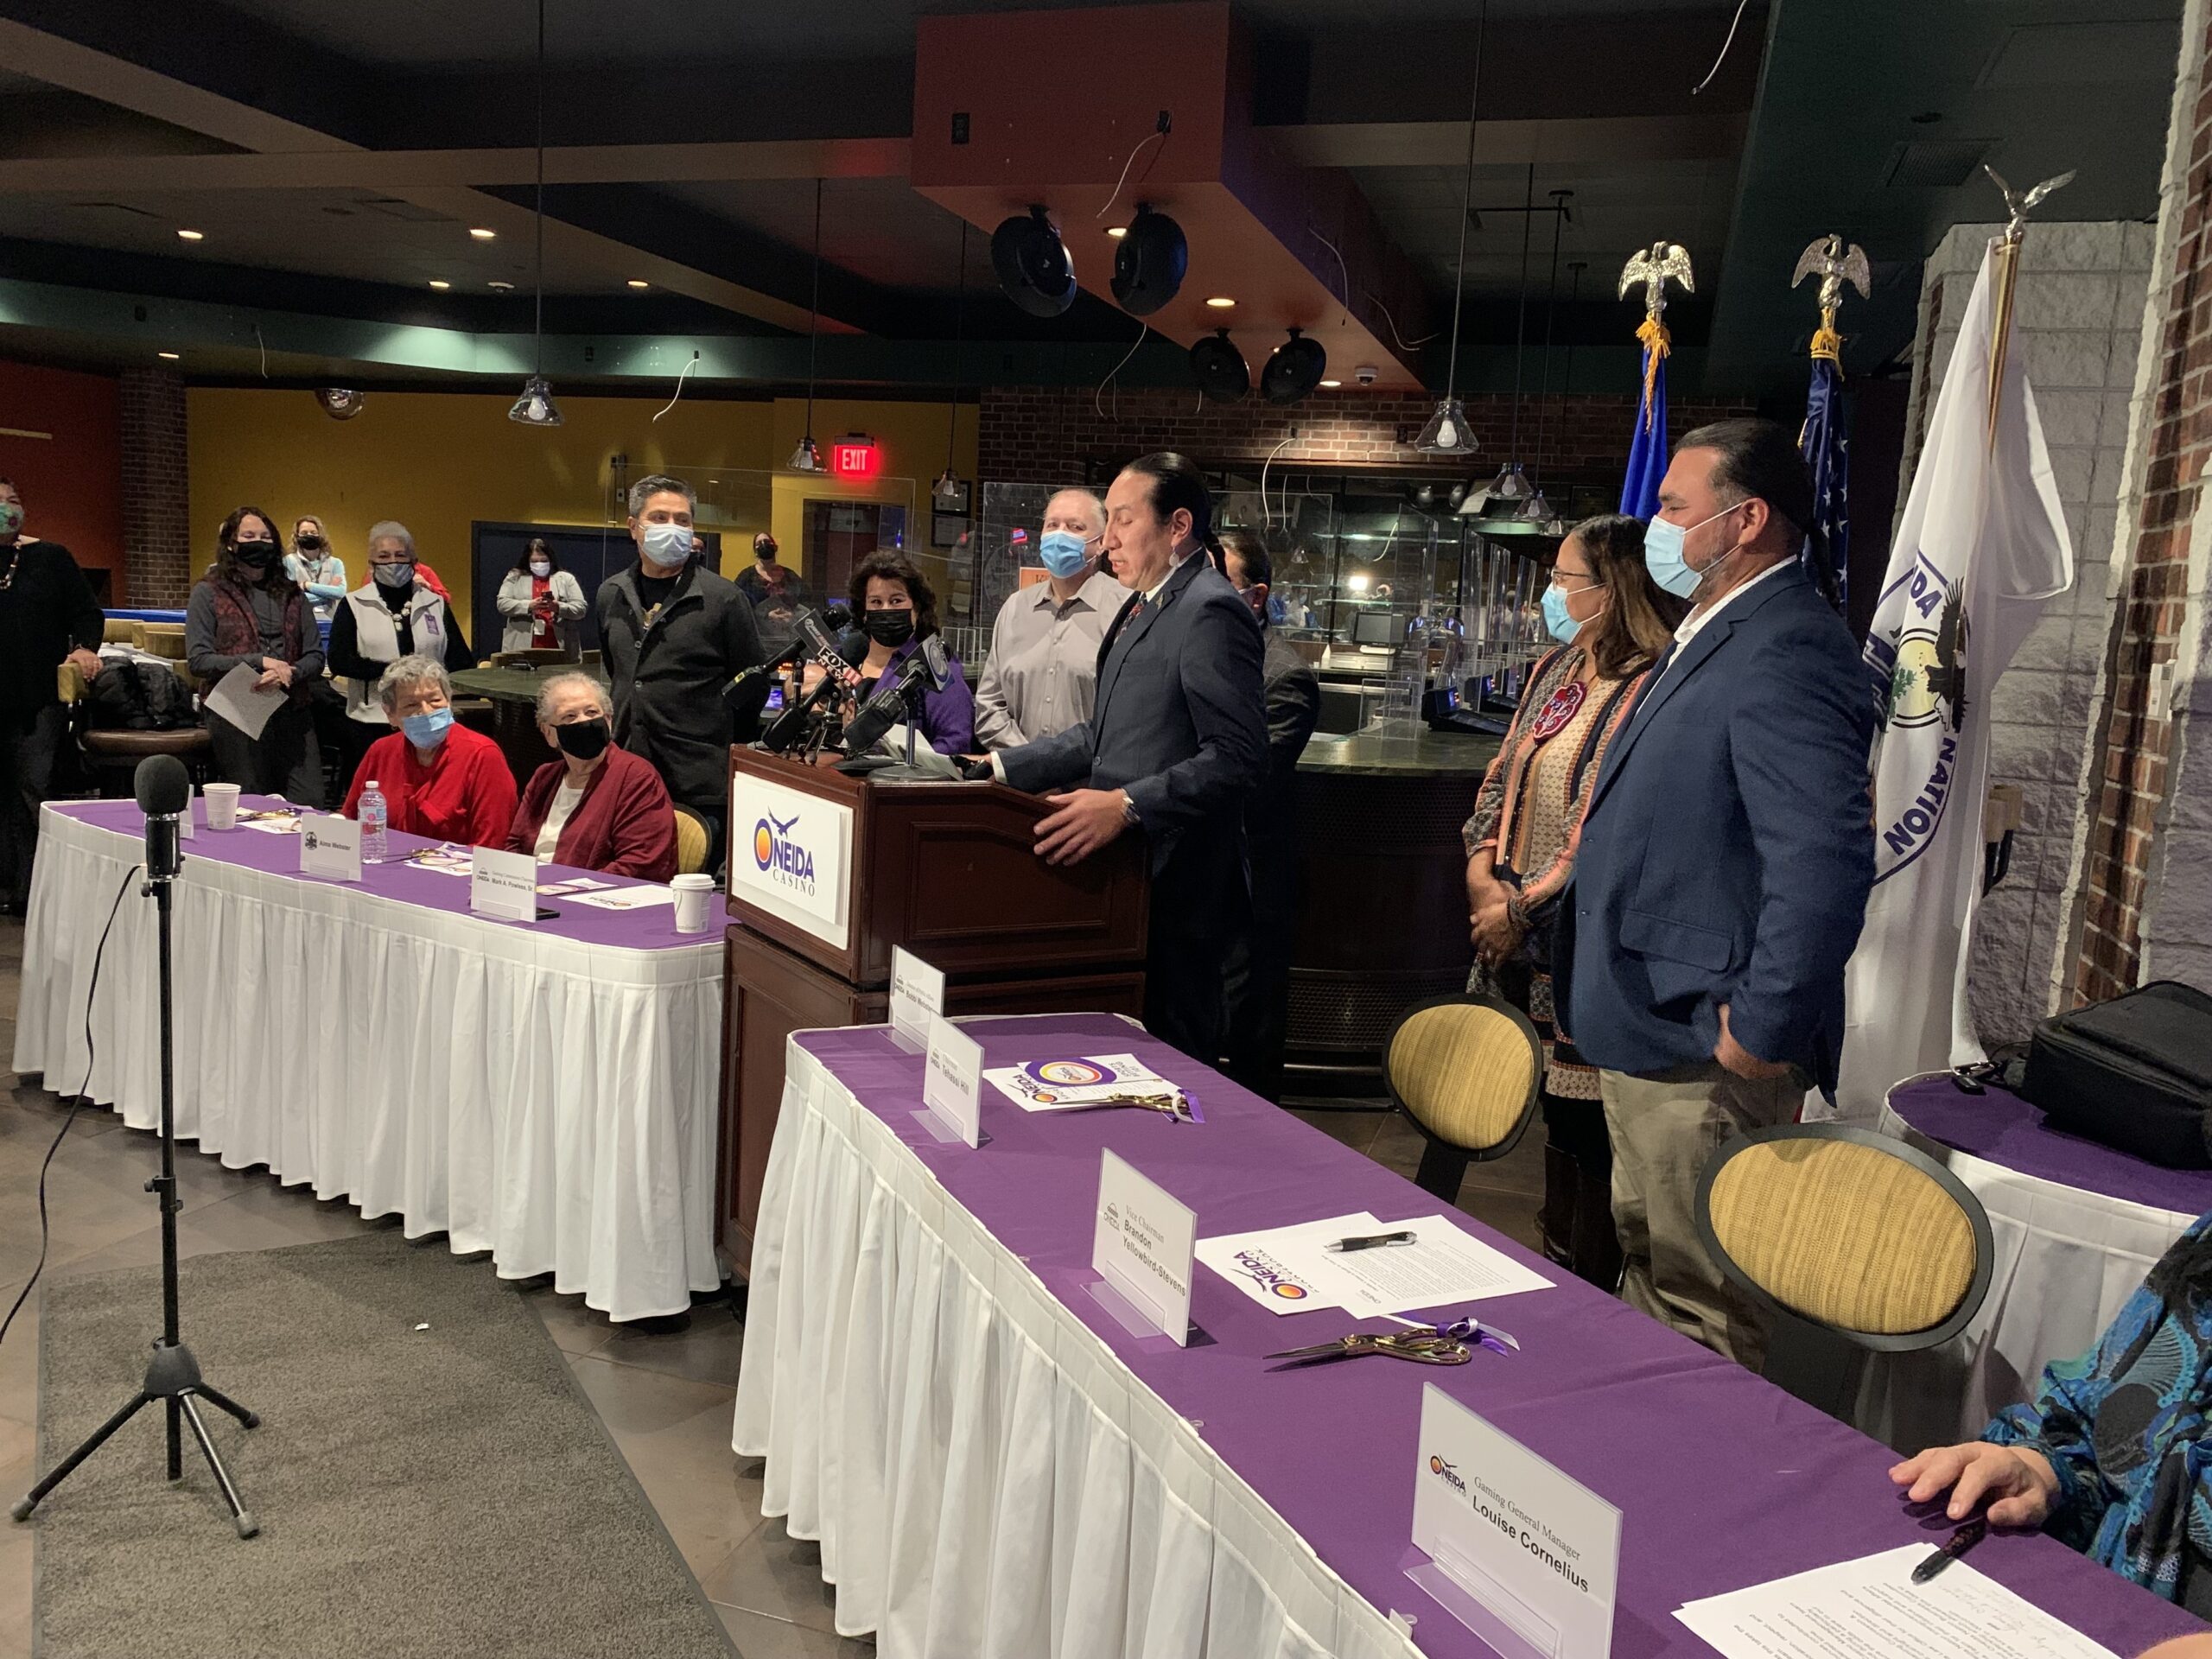 Officials speak at the 2021 opening of legal sports betting at a Green Bay Casino